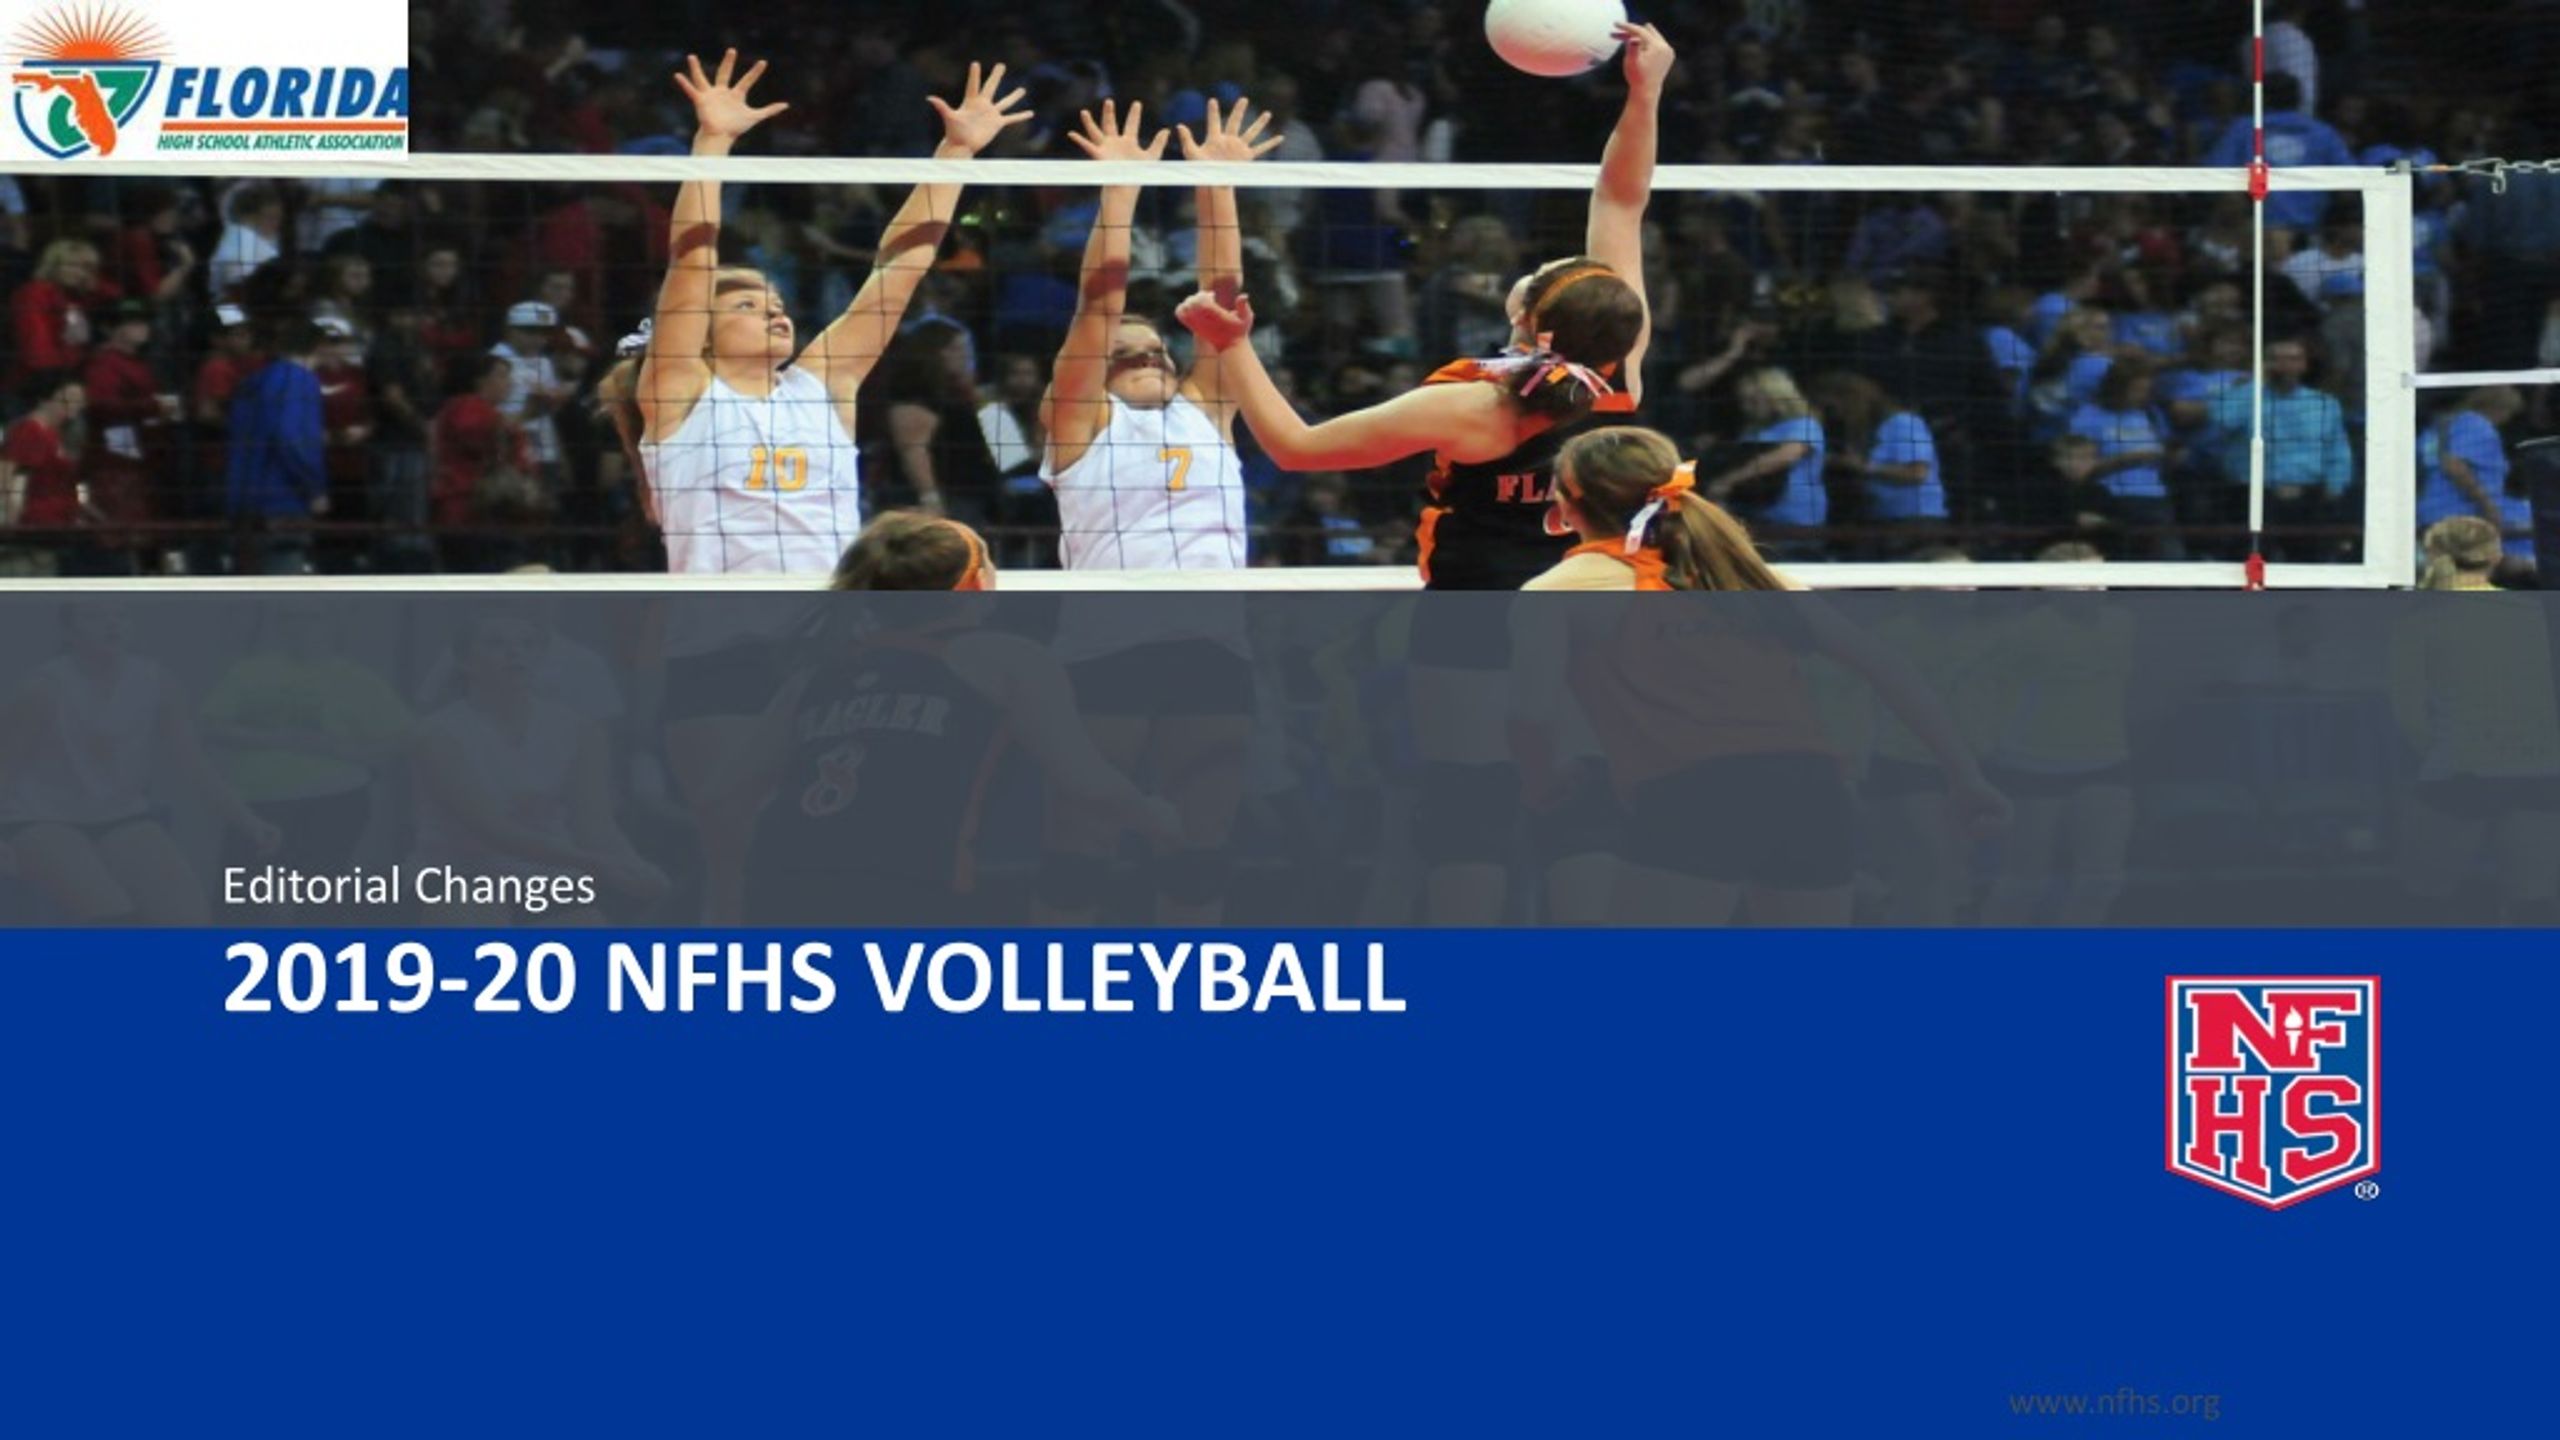 PPT 201920 FHSAA/NFHS VOLLEYBALL RULES POWERPOINT PowerPoint